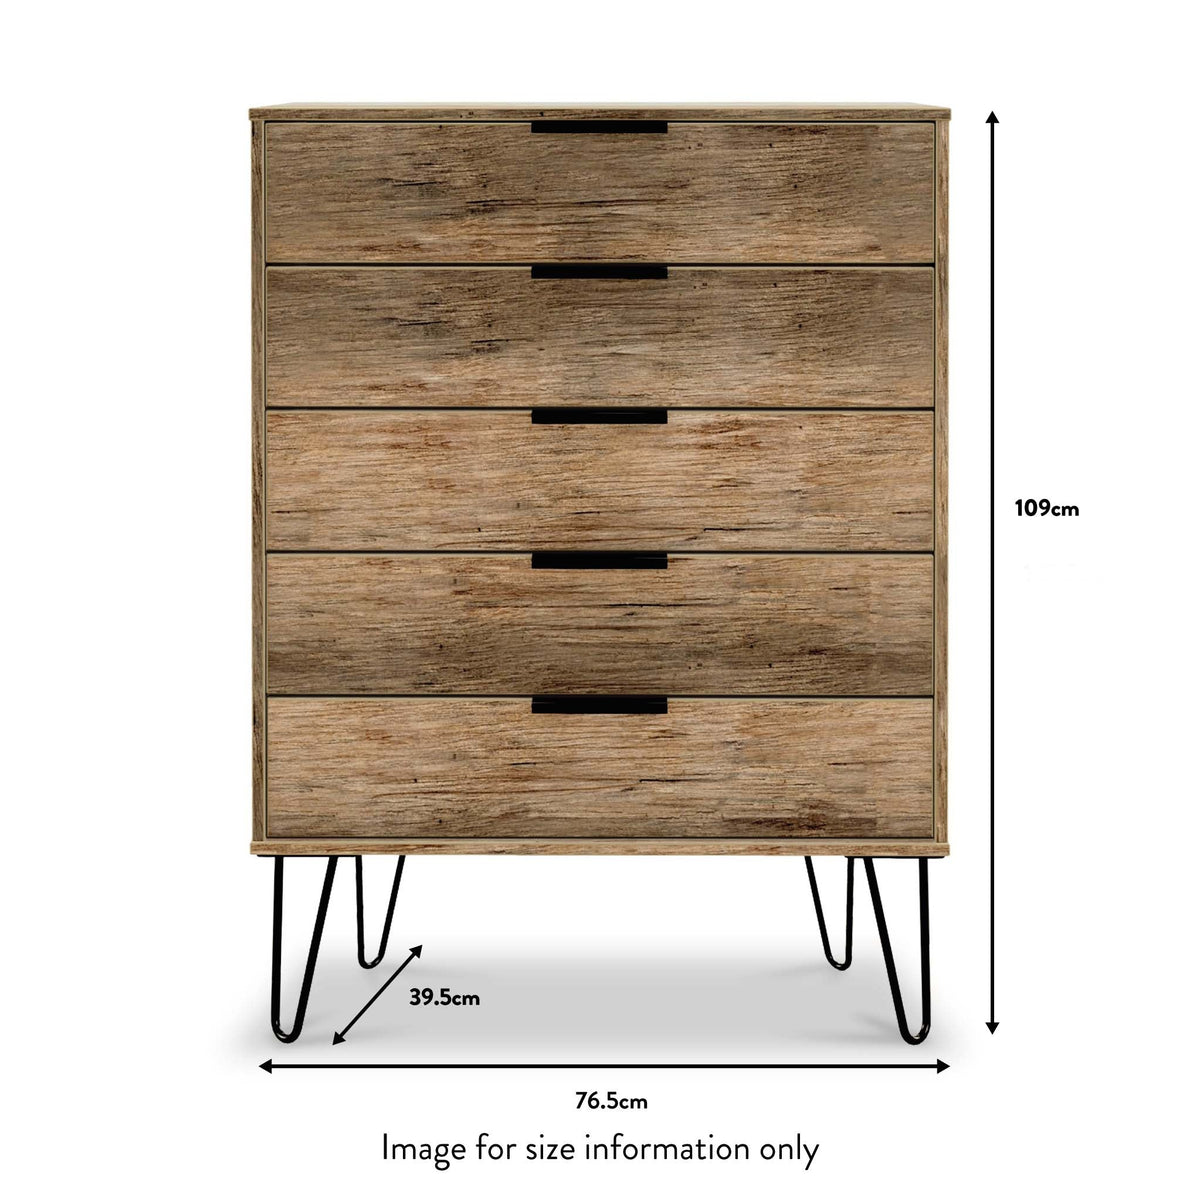 Moreno Rustic Oak 5 Drawer Chest with Black Hairpin Legs size guide